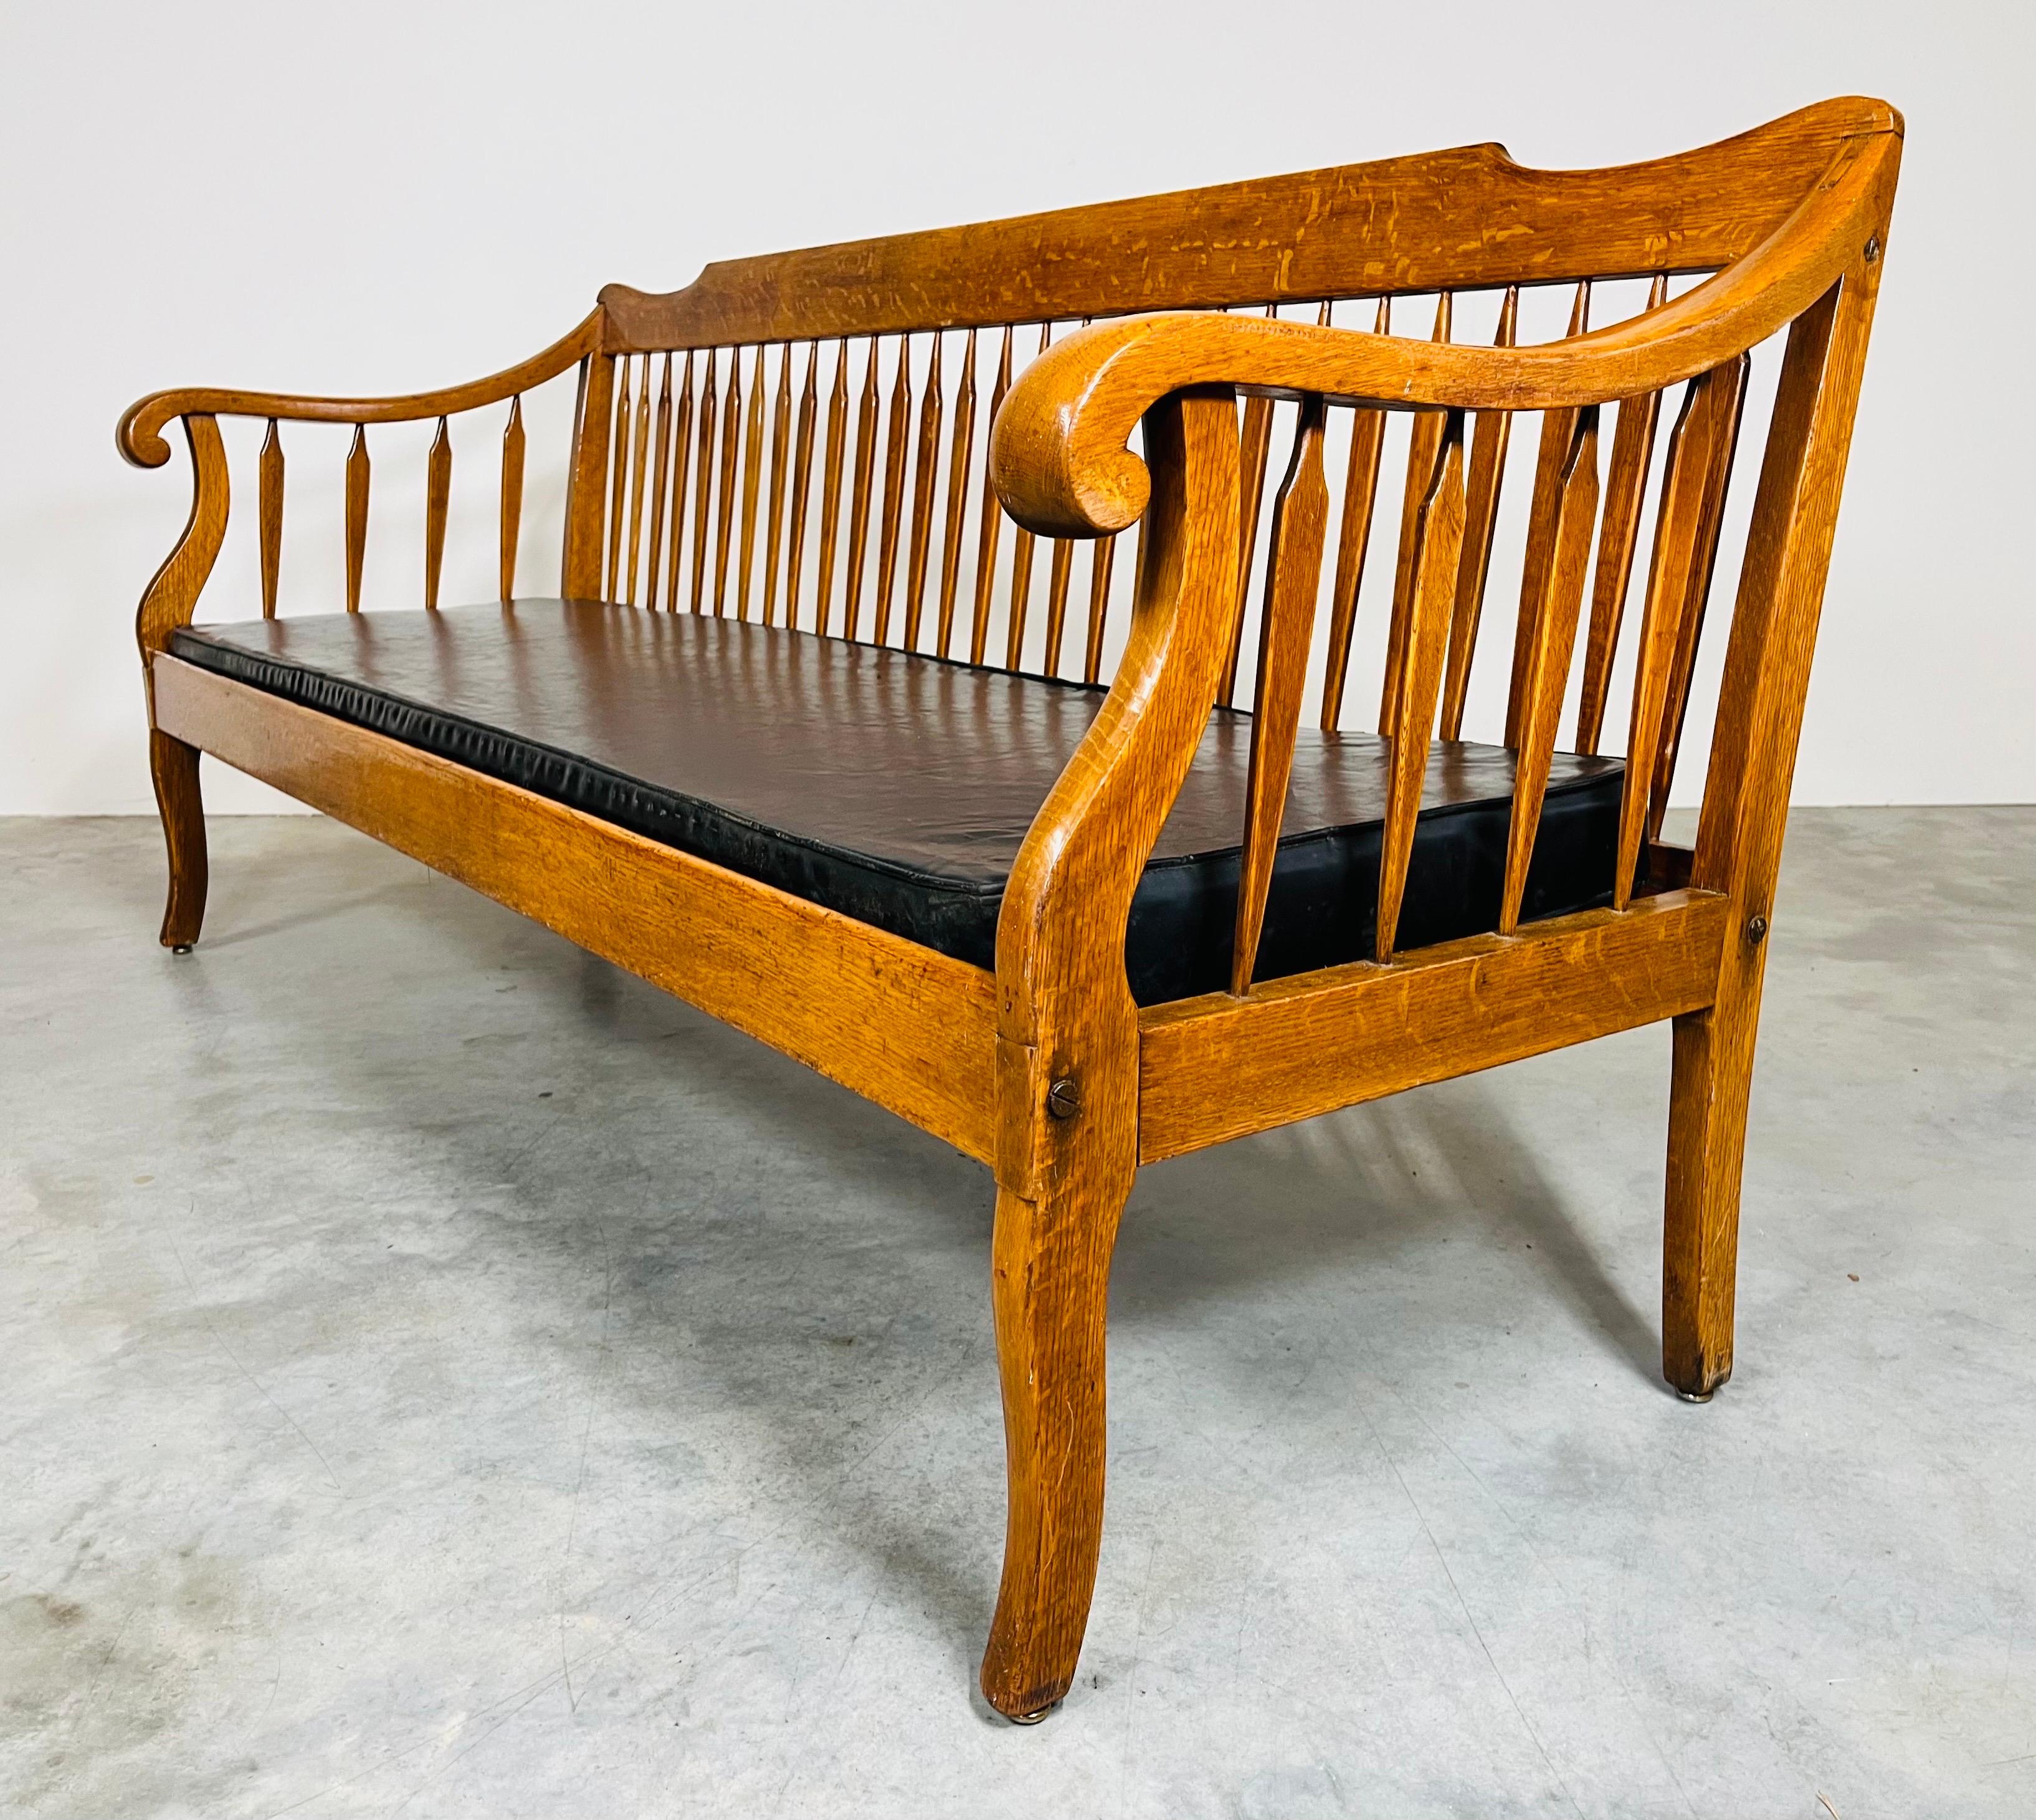 Early 20th Century Antique Lawyers or Lobby Bench In Good Condition For Sale In Southampton, NJ